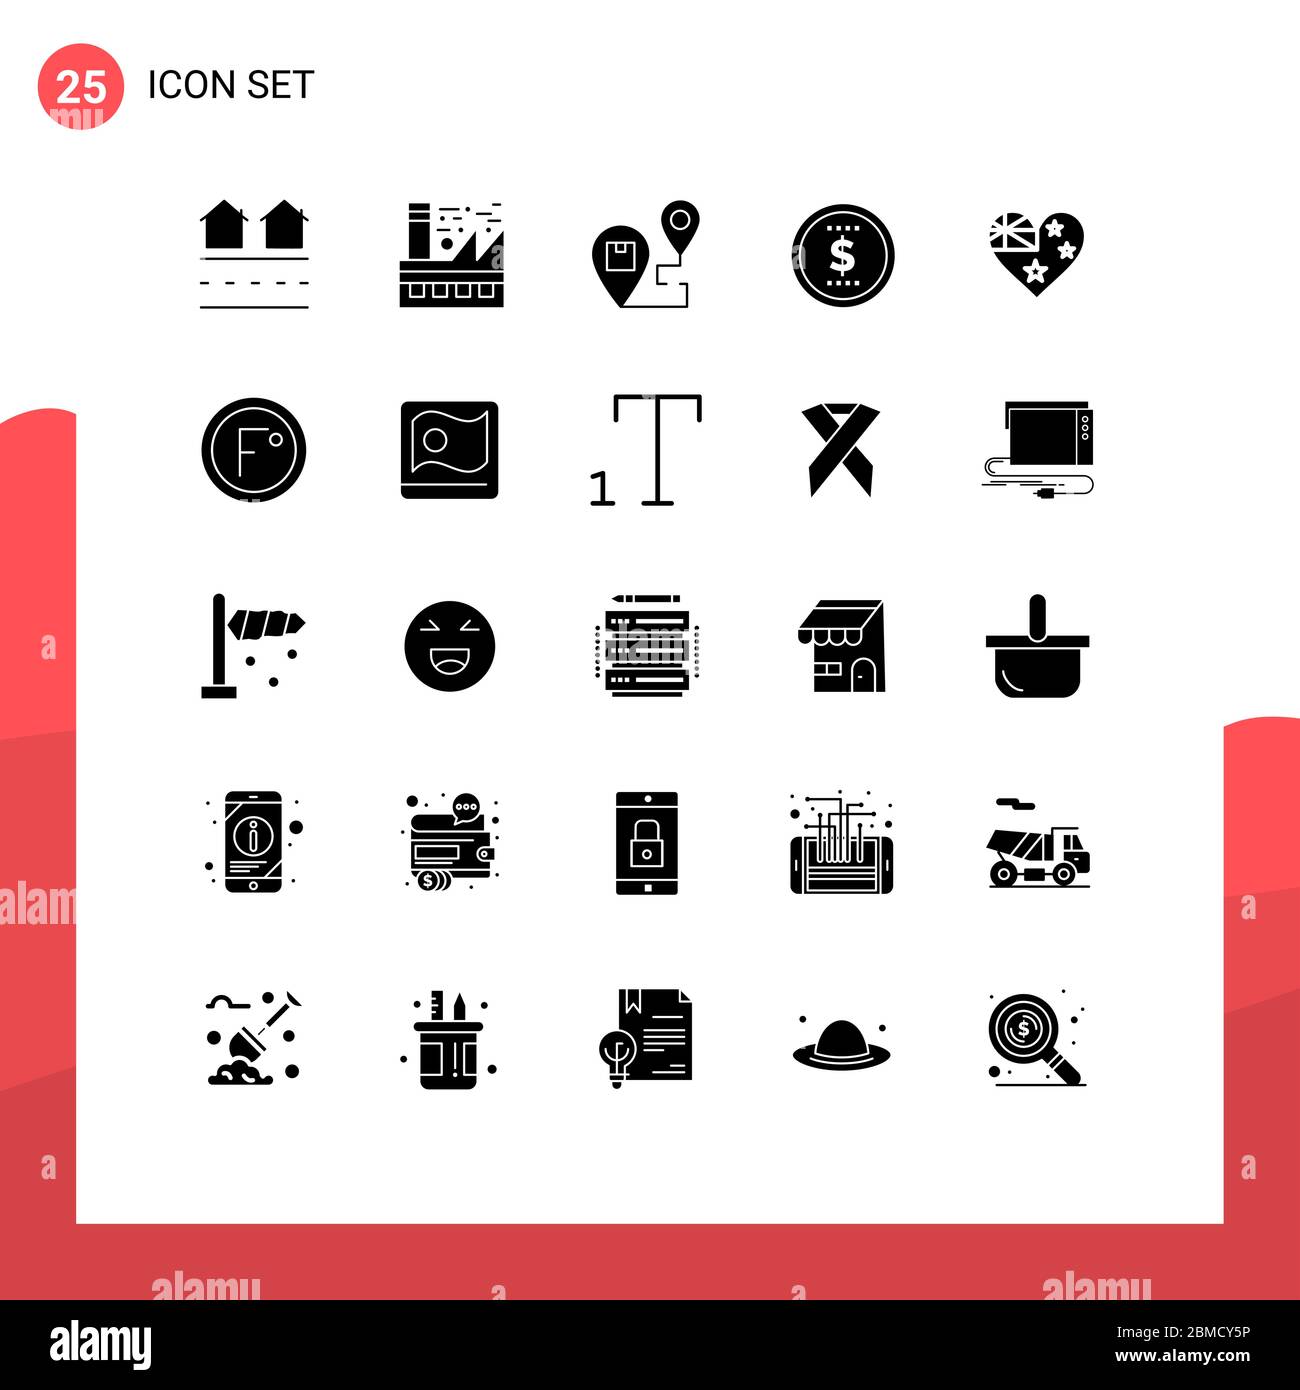 Universal Icon Symbols Group of 25 Modern Solid Glyphs of price, finance, energy, shipping, location Editable Vector Design Elements Stock Vector